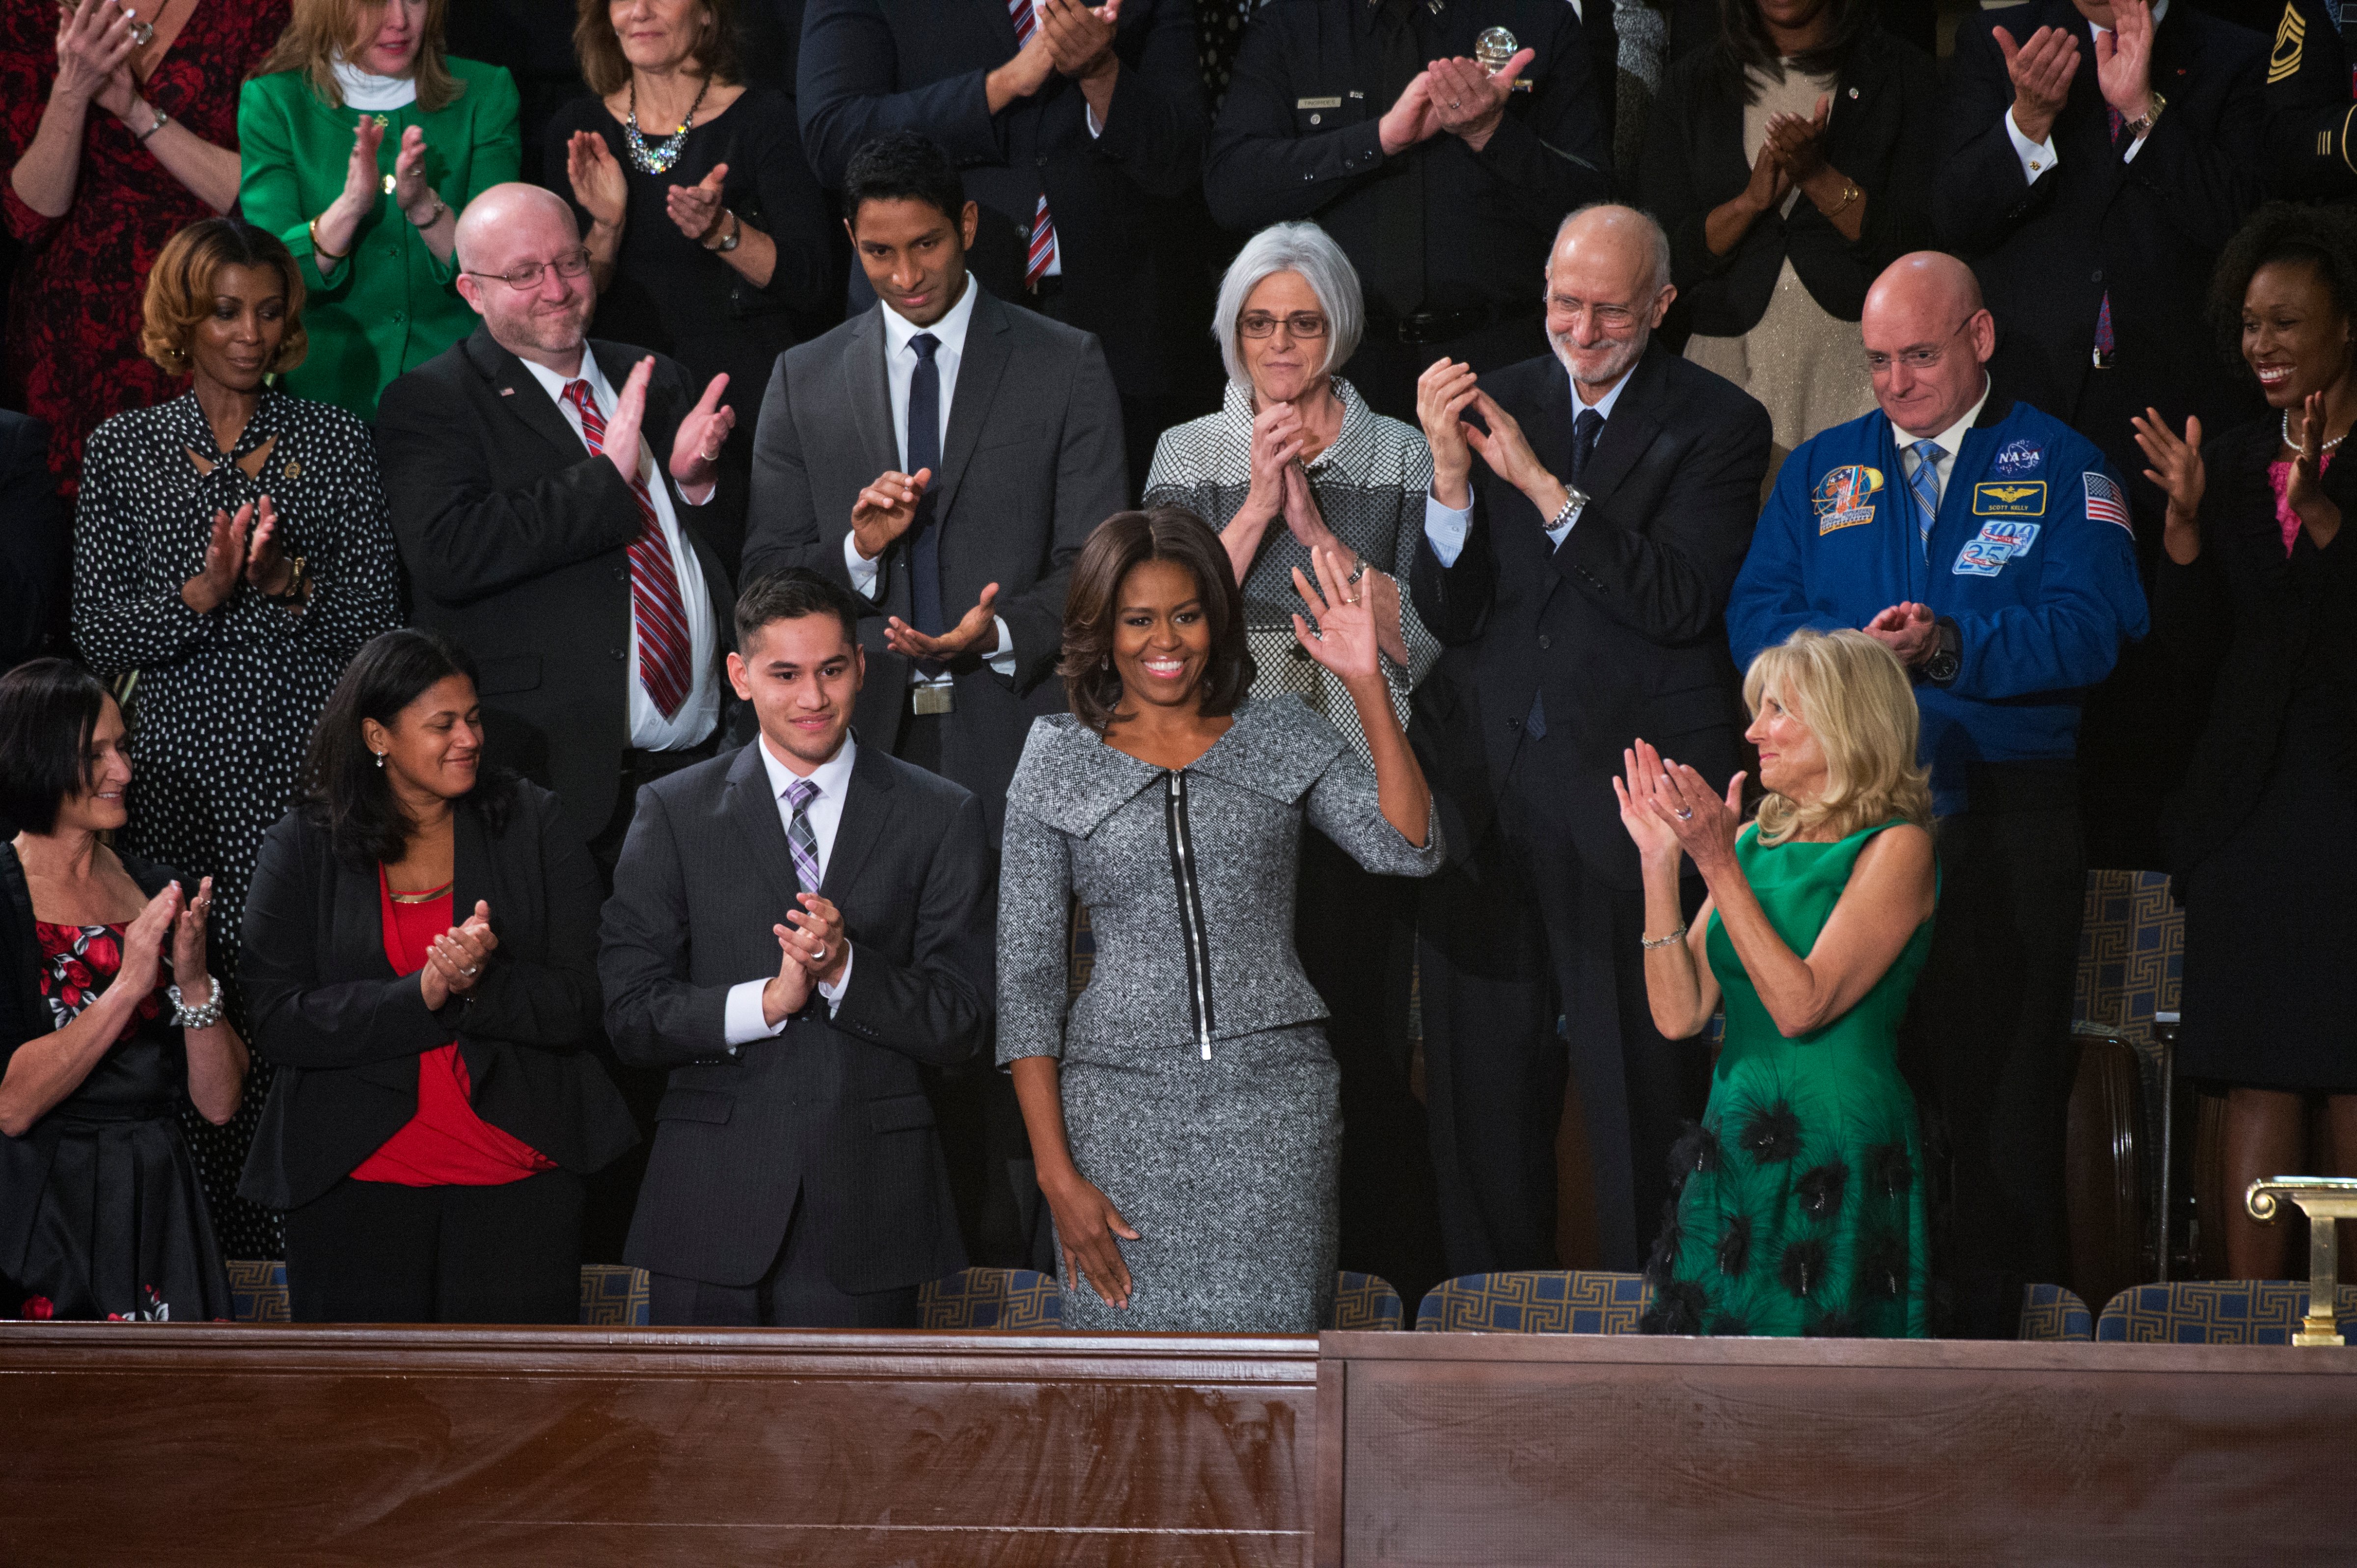 First Lady Michelle Obama arrives in the Capitol's House chamber before President Barack Obama's State of the Union address, January 20, 2015. (Tom Williams / CQ Roll Call / Getty Images)